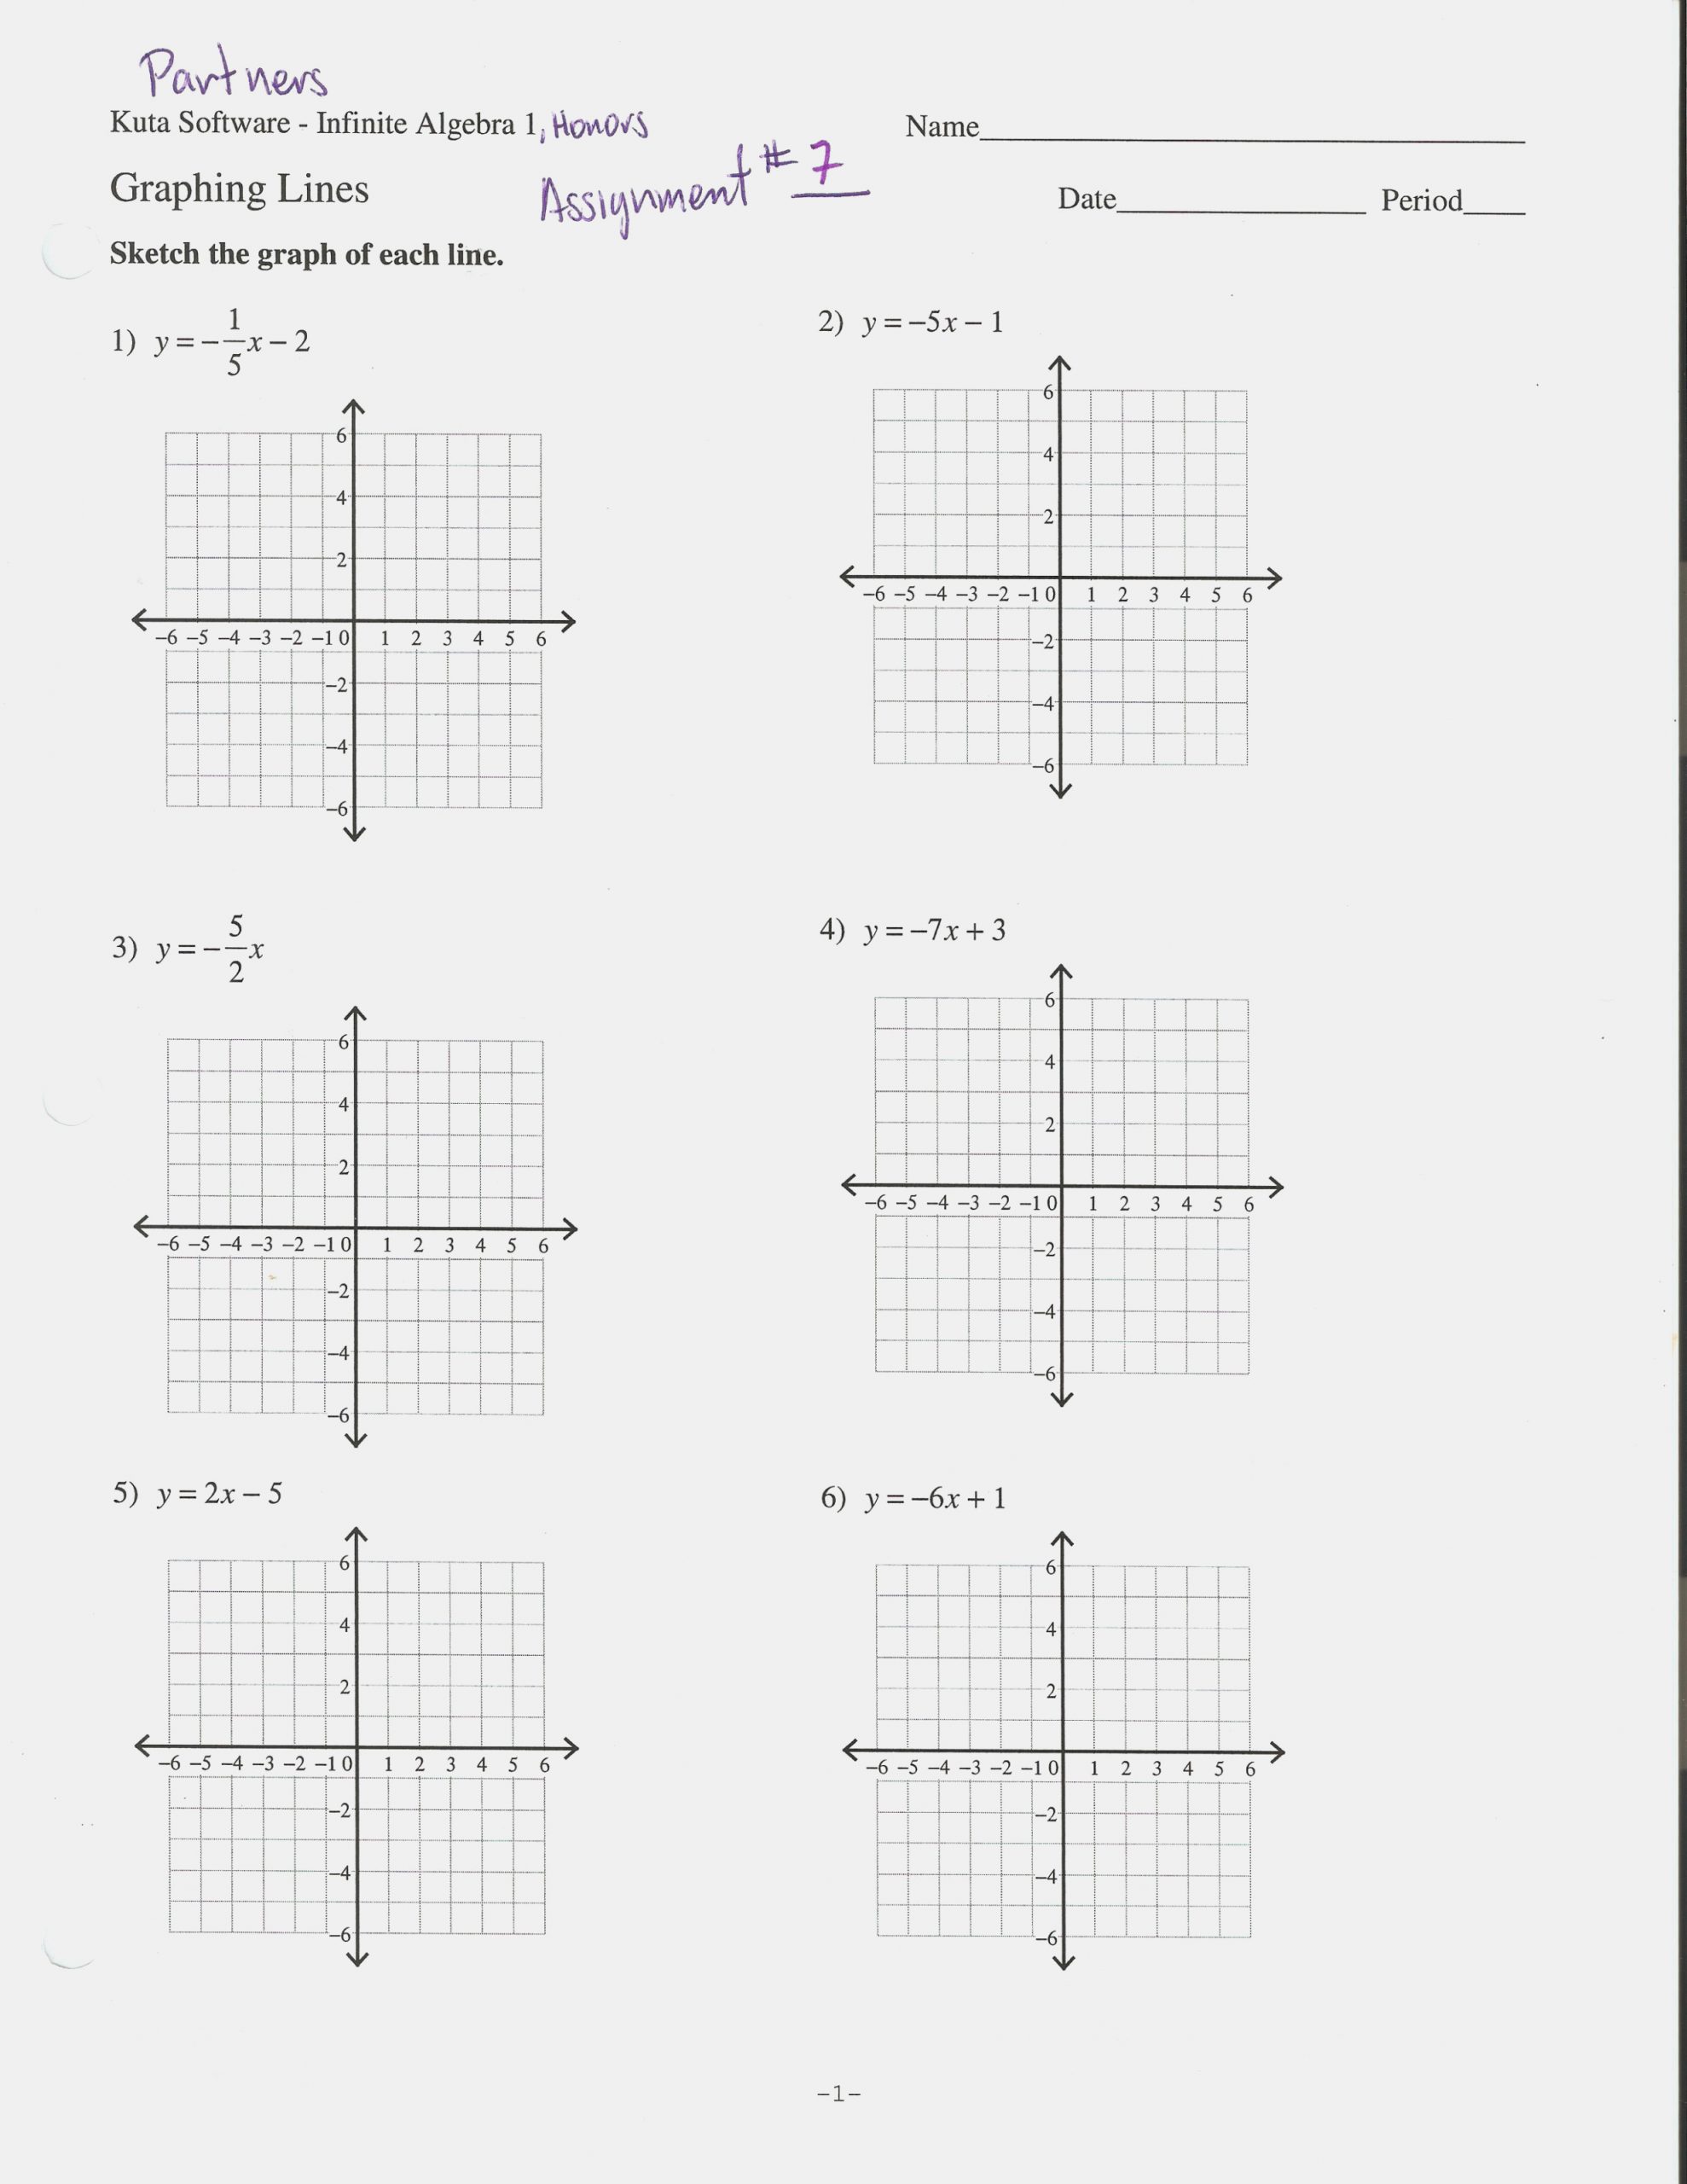 Graphing Linear Equations Practice Worksheet Lovely Linear Equations Worksheet with Answers